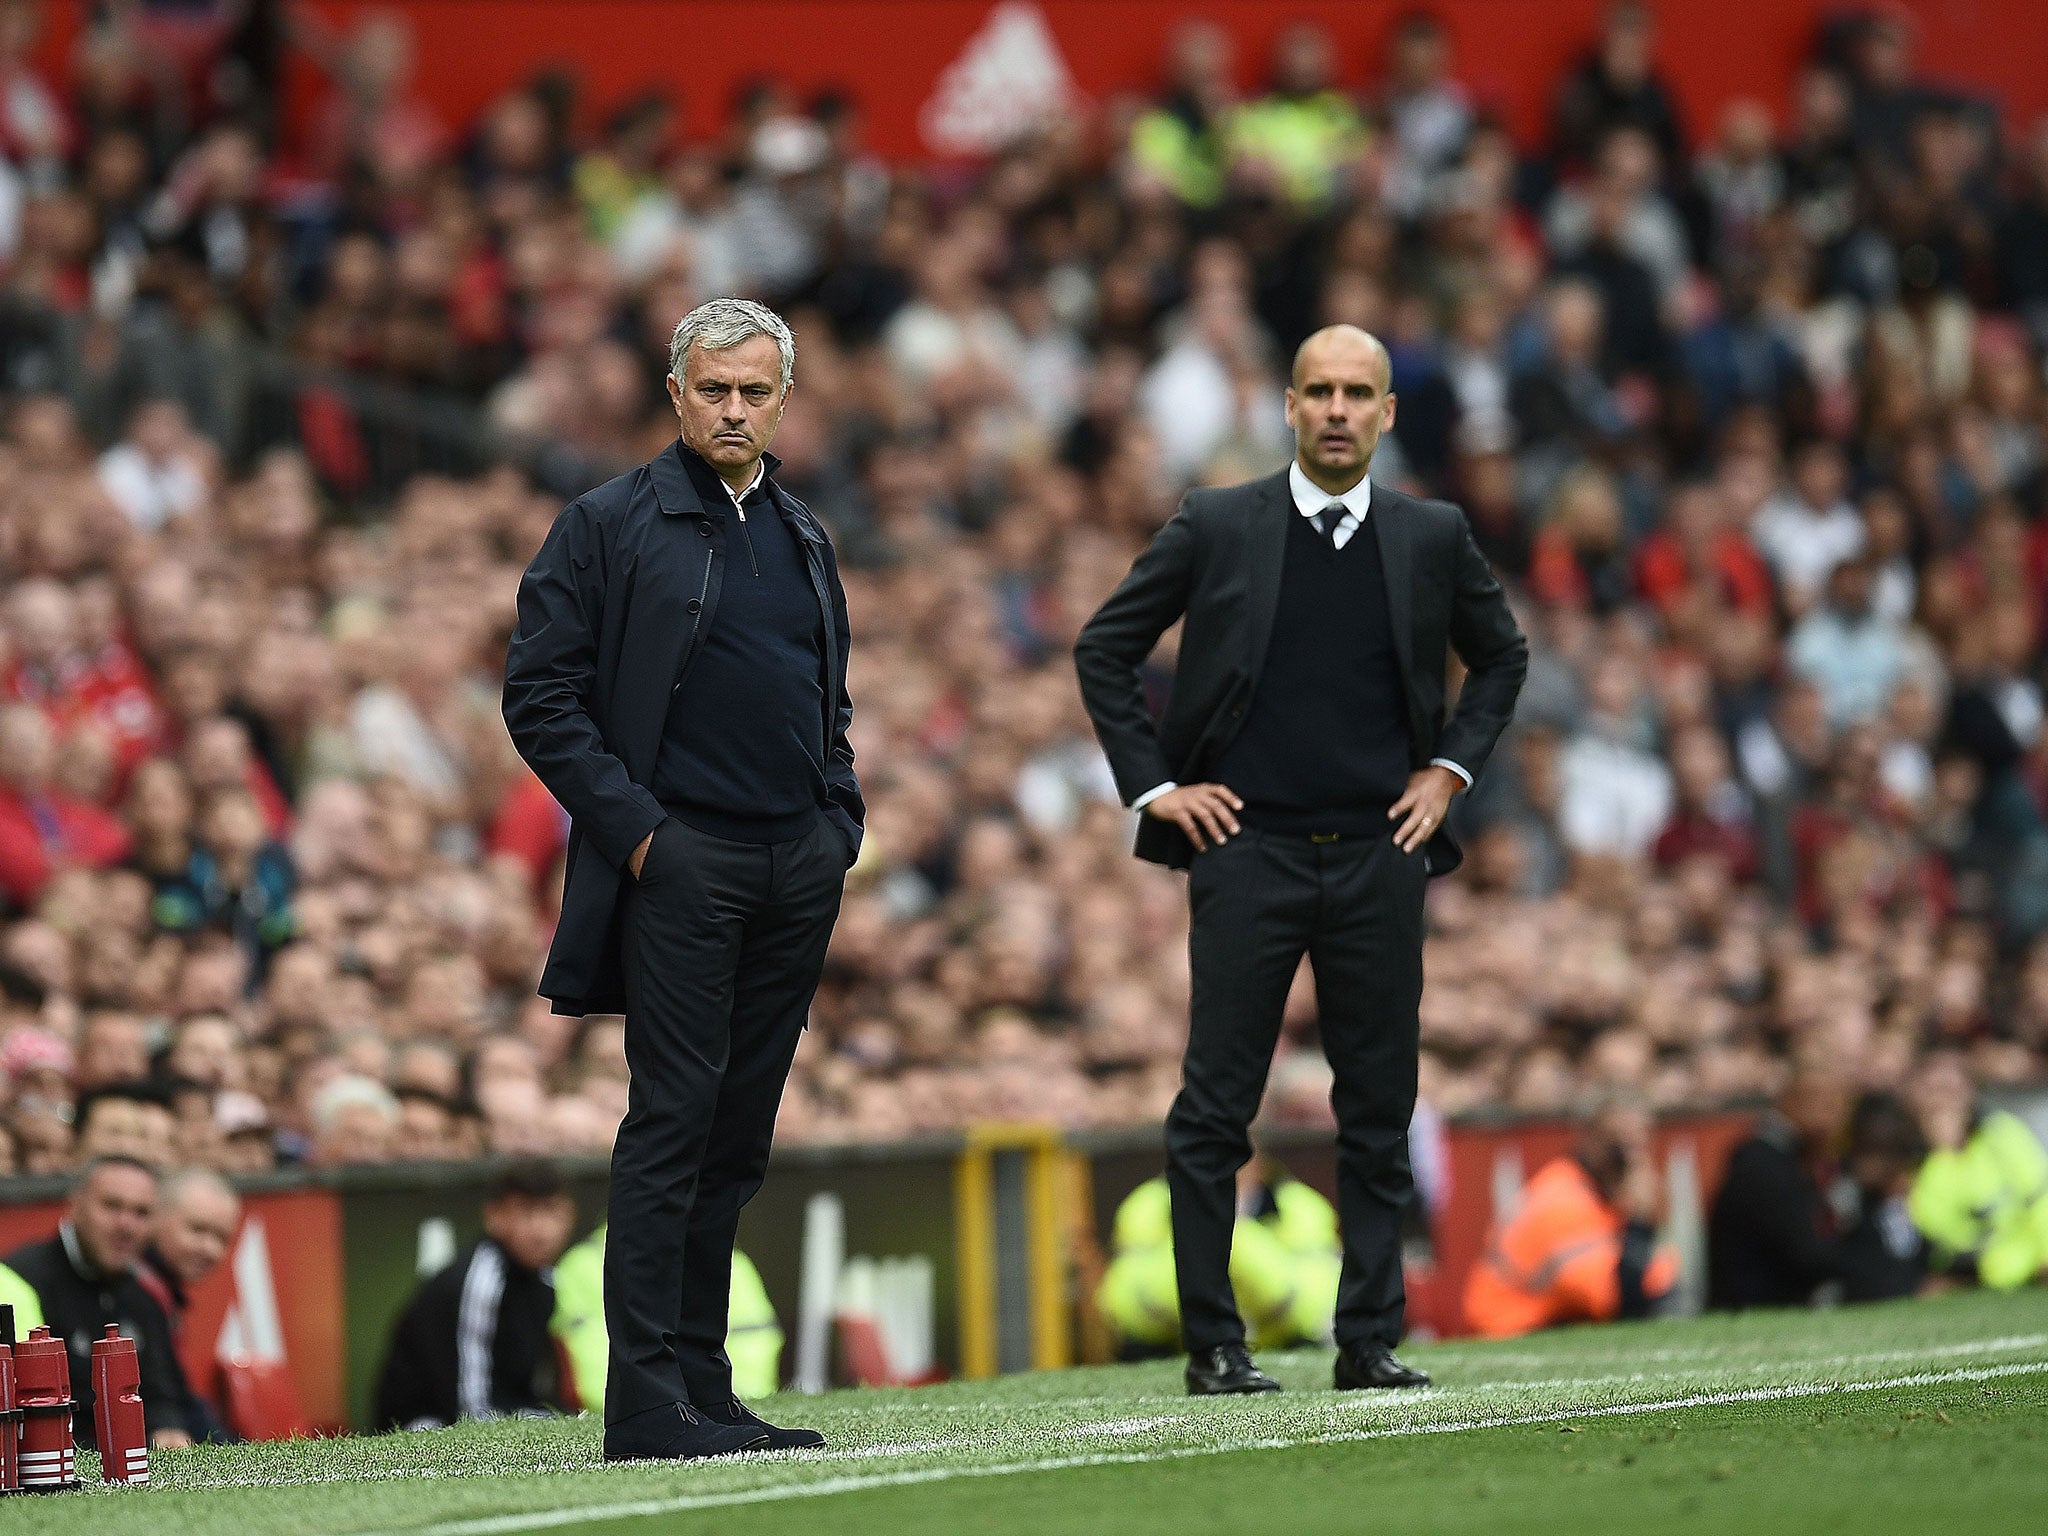 Guardiola and Mourinho on the side line at Old Trafford during this month's Manchester derby